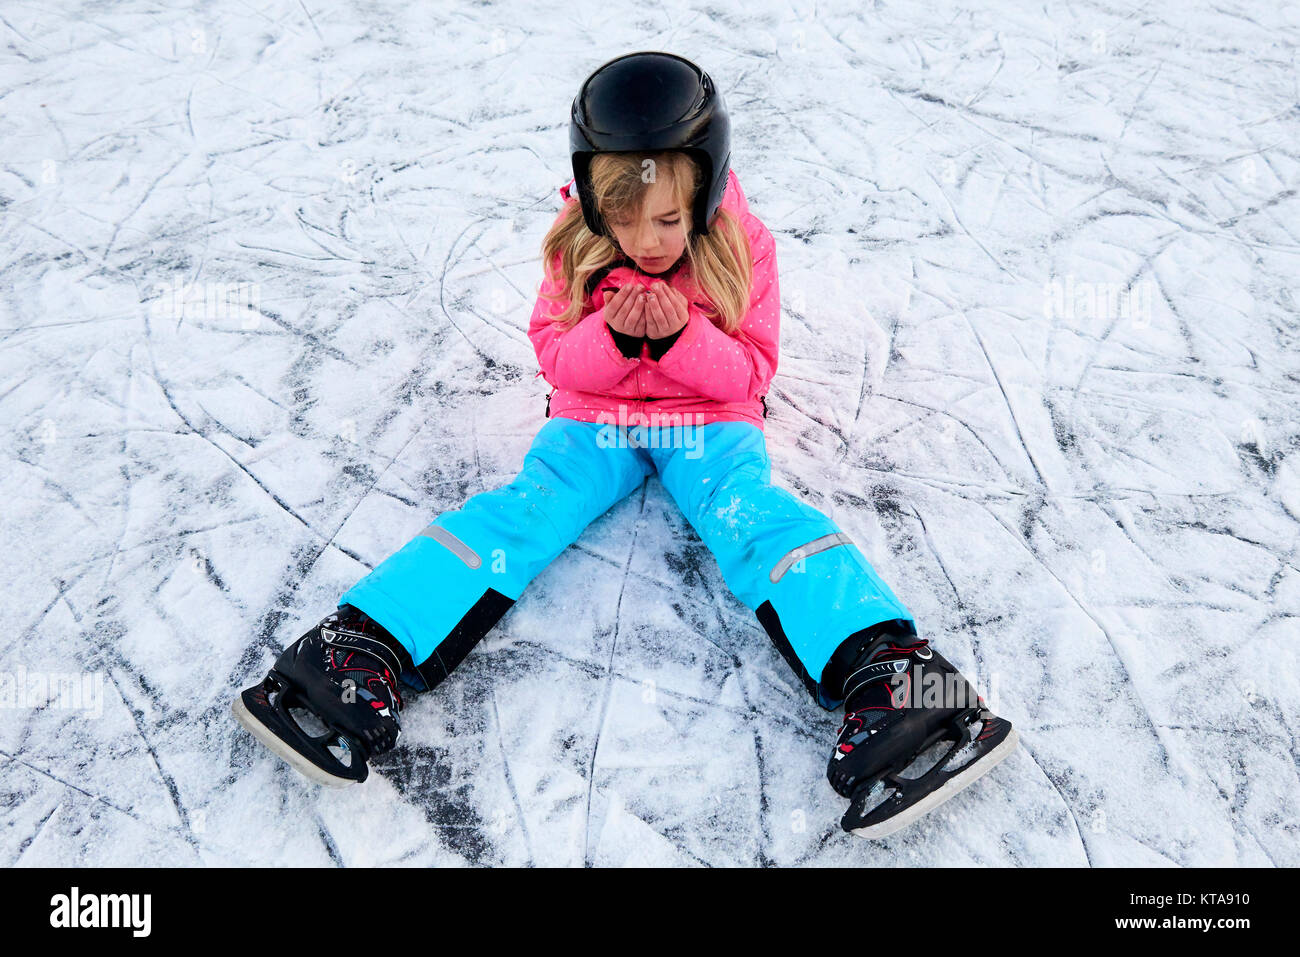 Child girl falling down on ice in snowy park during winter holidays. Wearing safety helmet. Winter children activities. Stock Photo